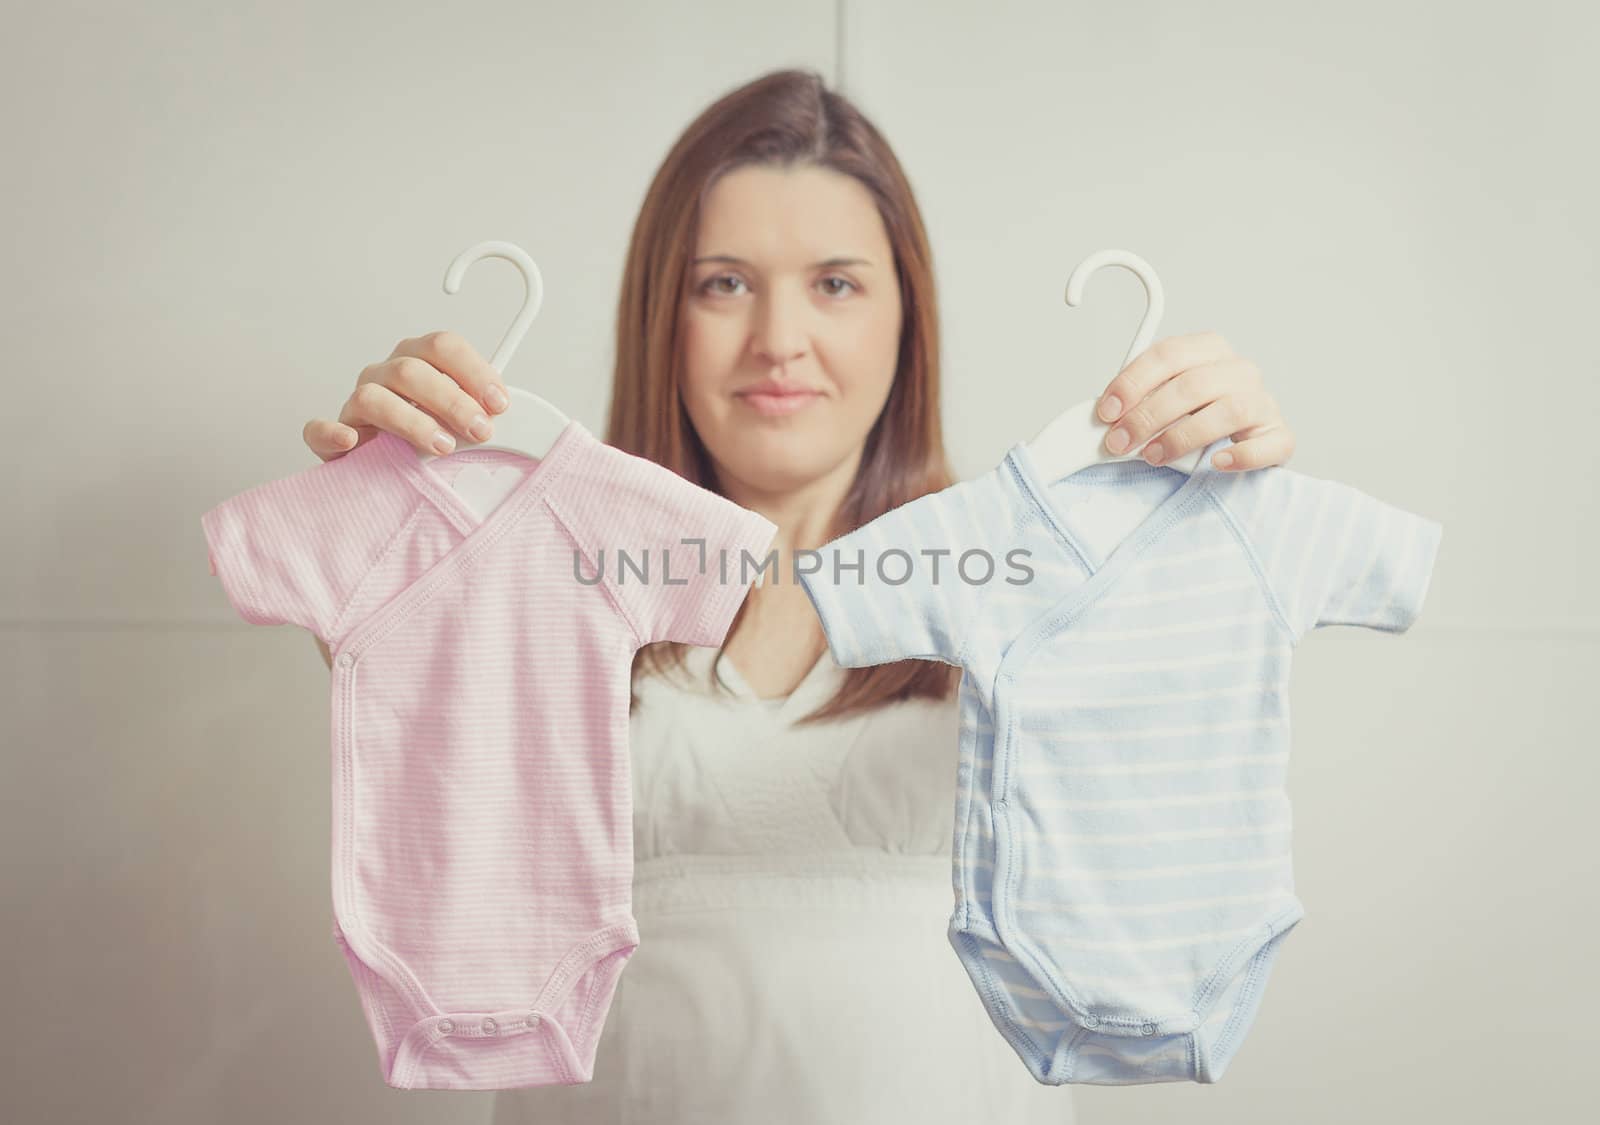 Beautiful pregnant young woman holding up bodysuits  for a girl or a boy newborn in soft pastel colors